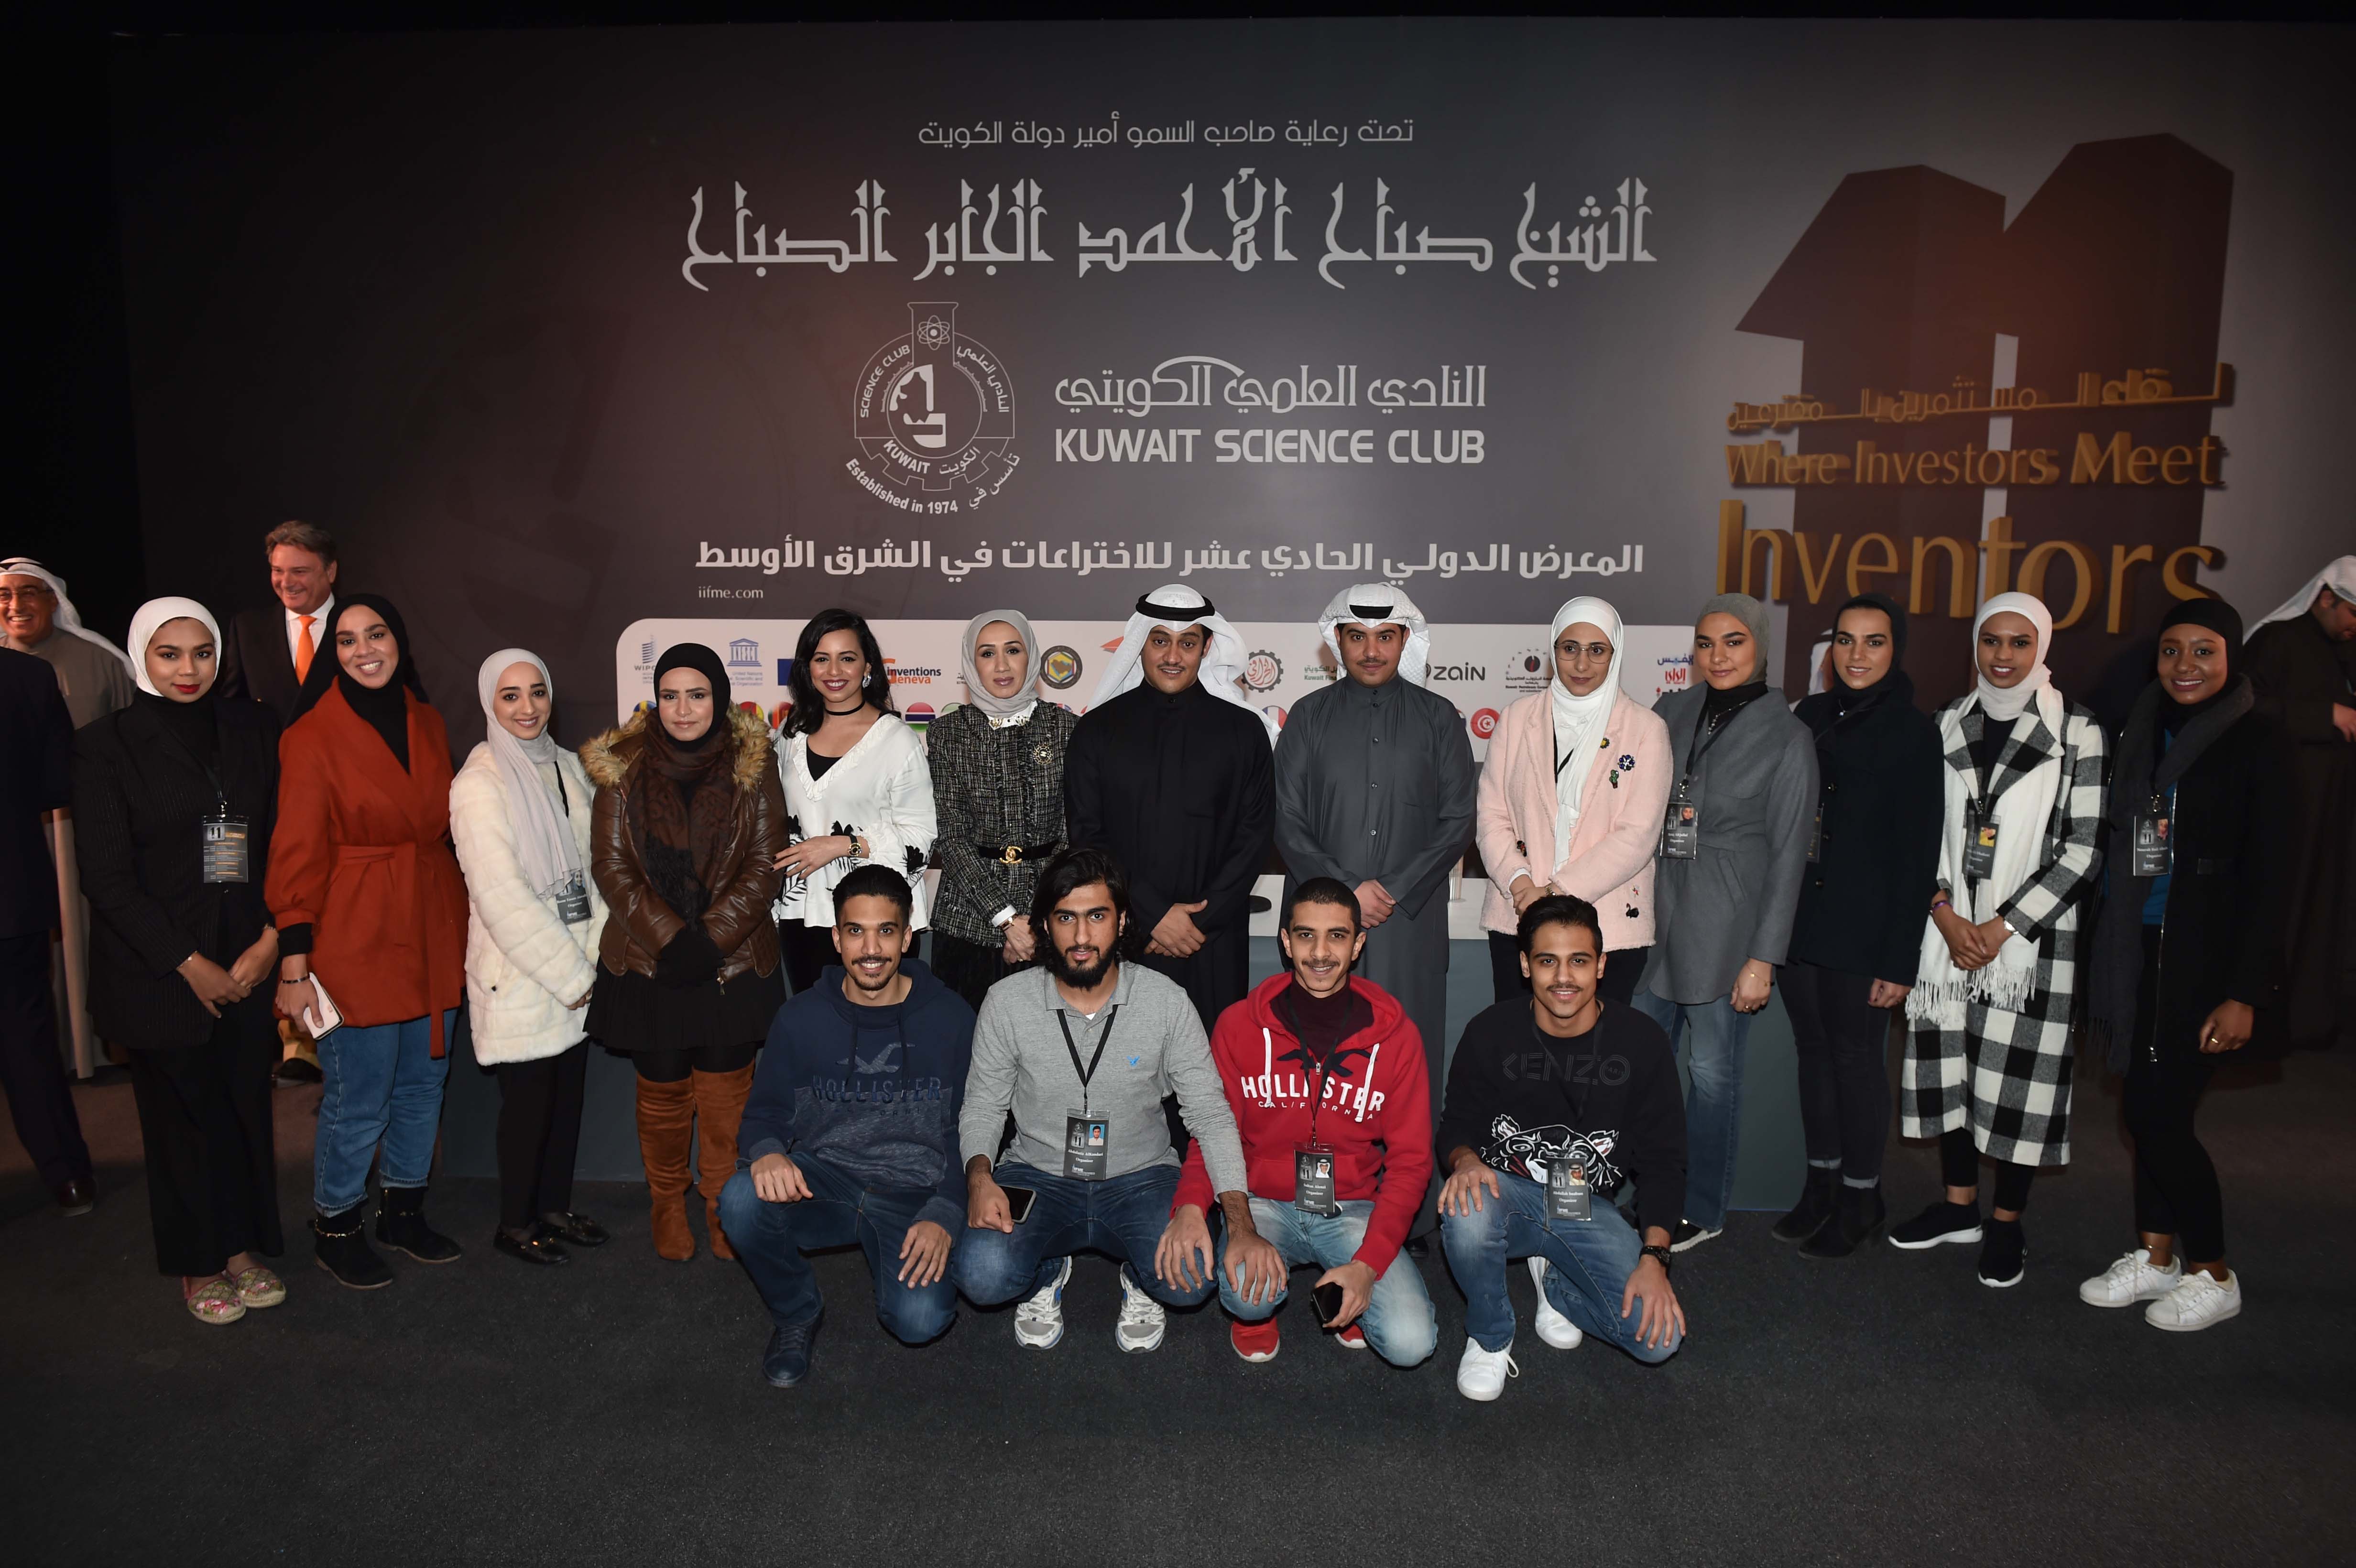 Talal Al-Kharafi, chairman of the Kuwait Science Club (KSC) and the IIFME organizing committee, and a number of KSC volunteers